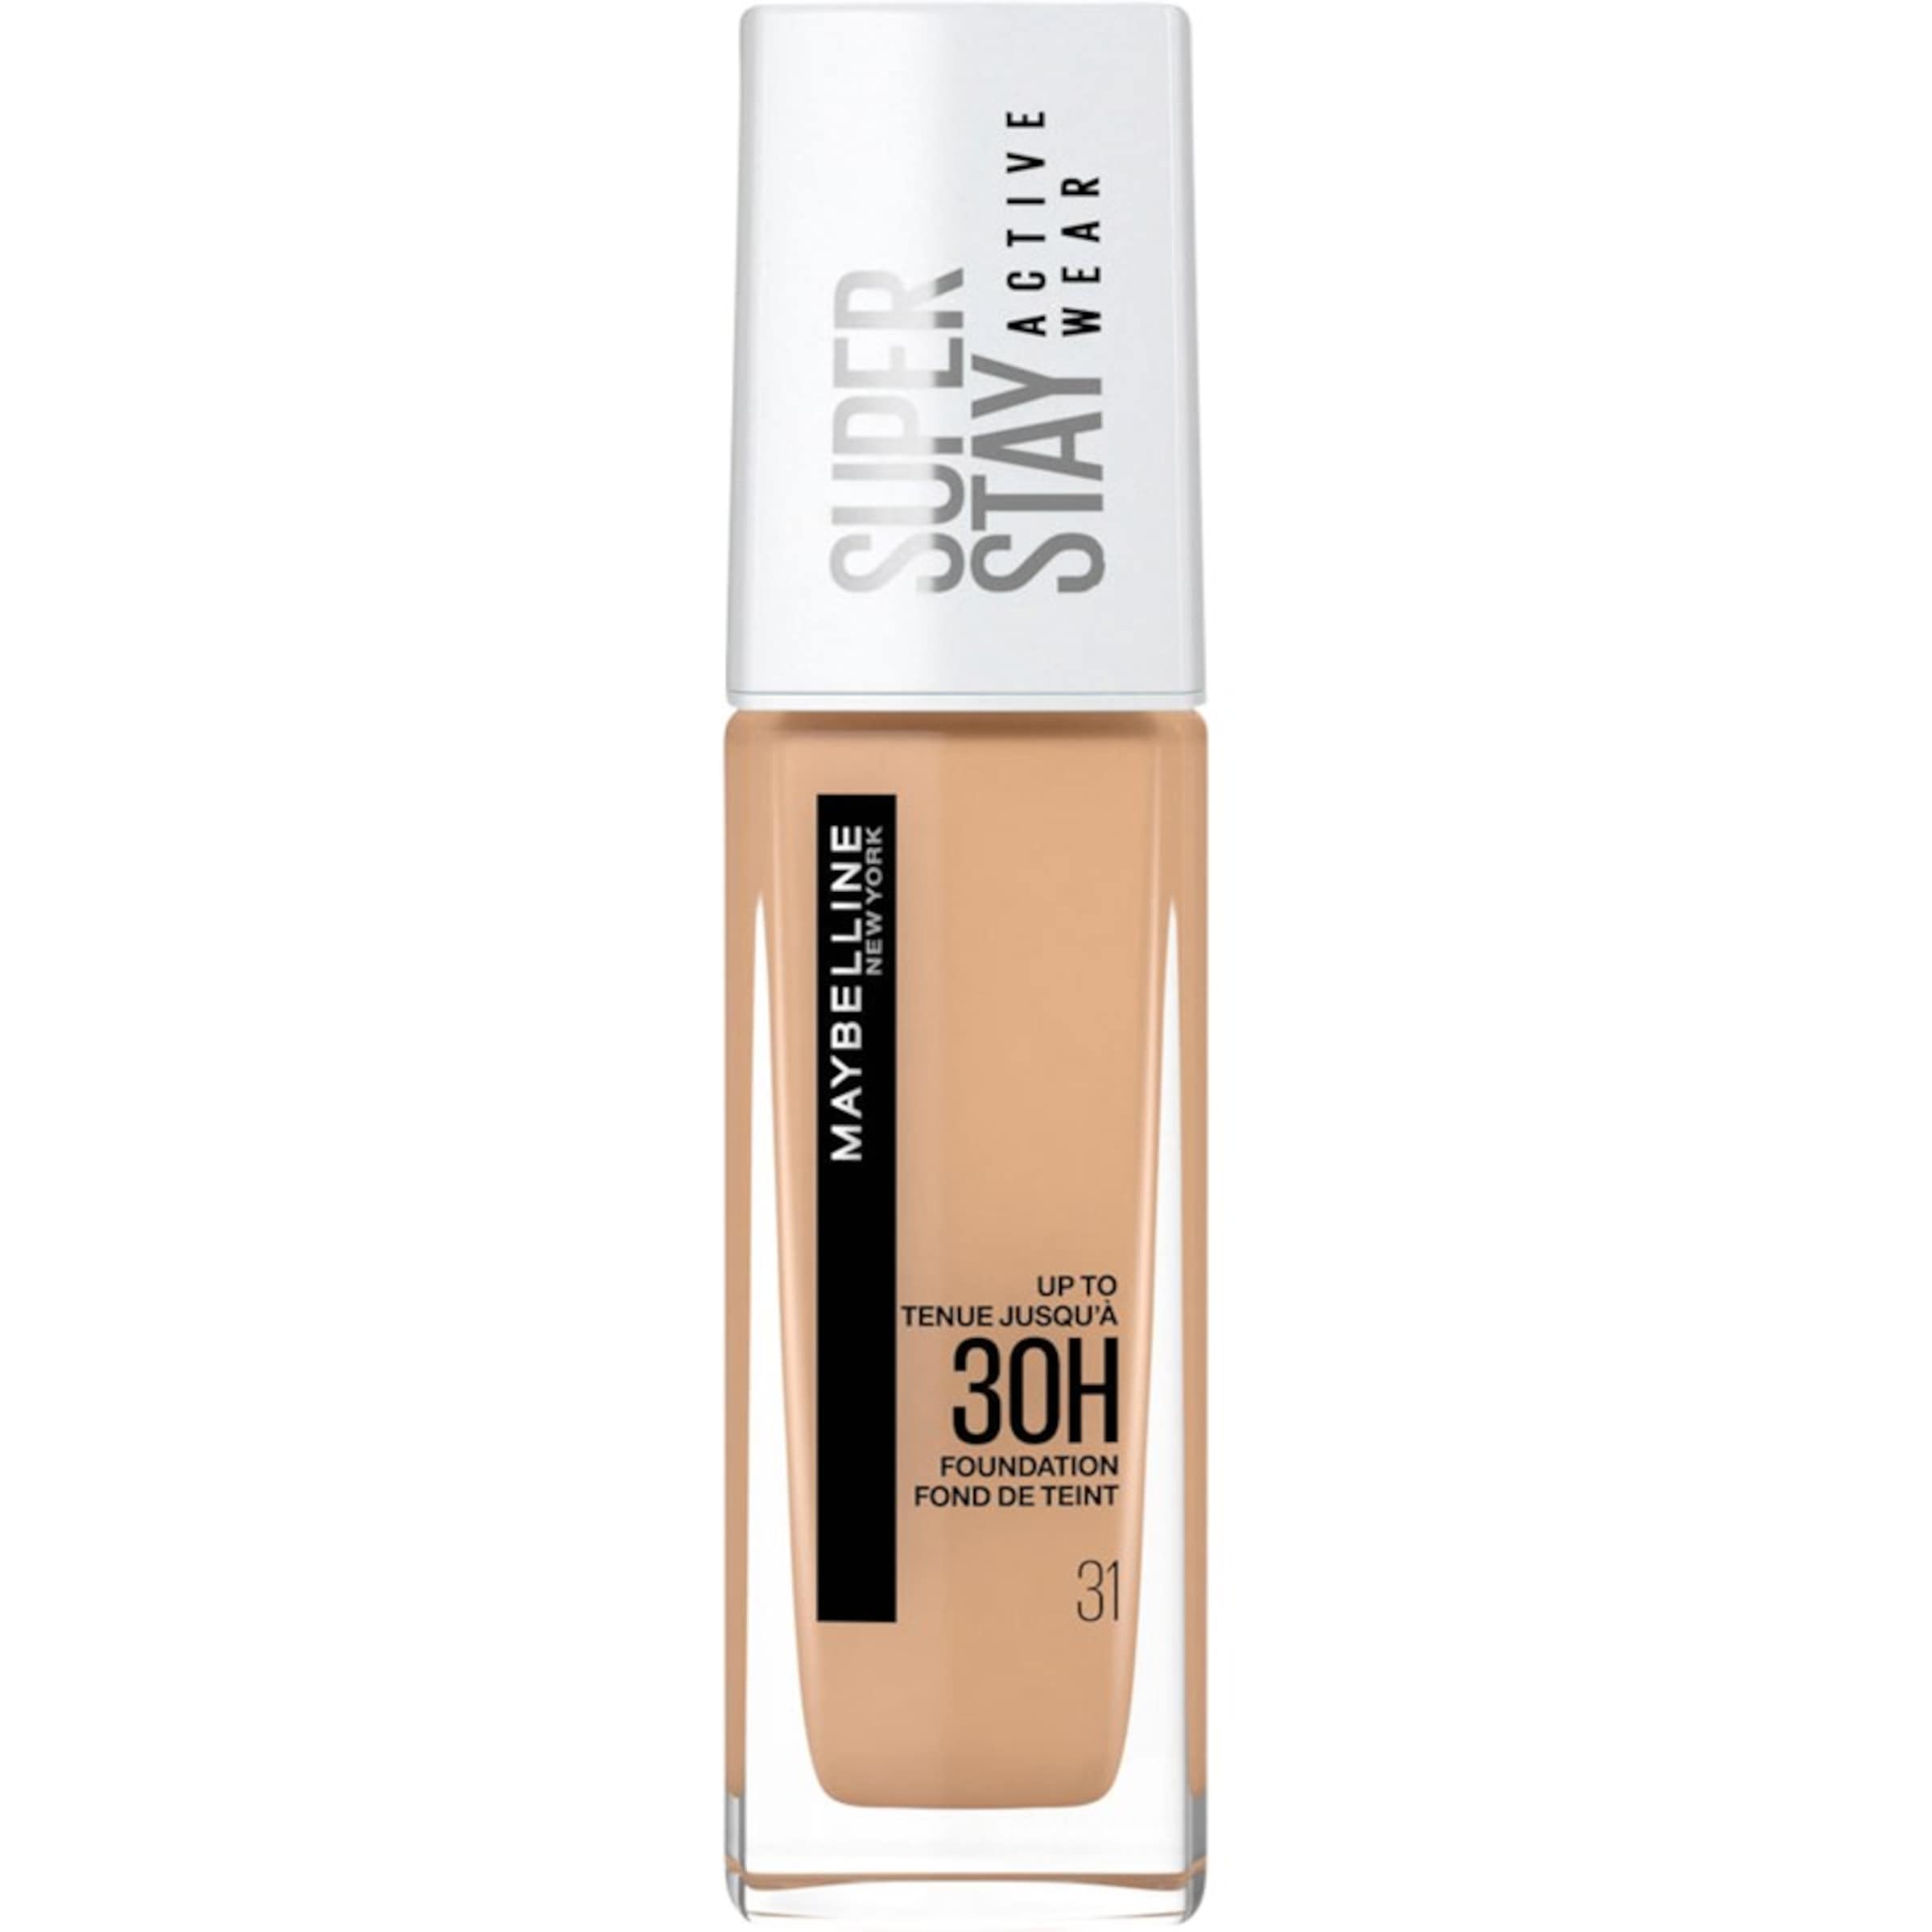 MAYBELLINE New York Foundation Super Stay Active Wear in Beige 